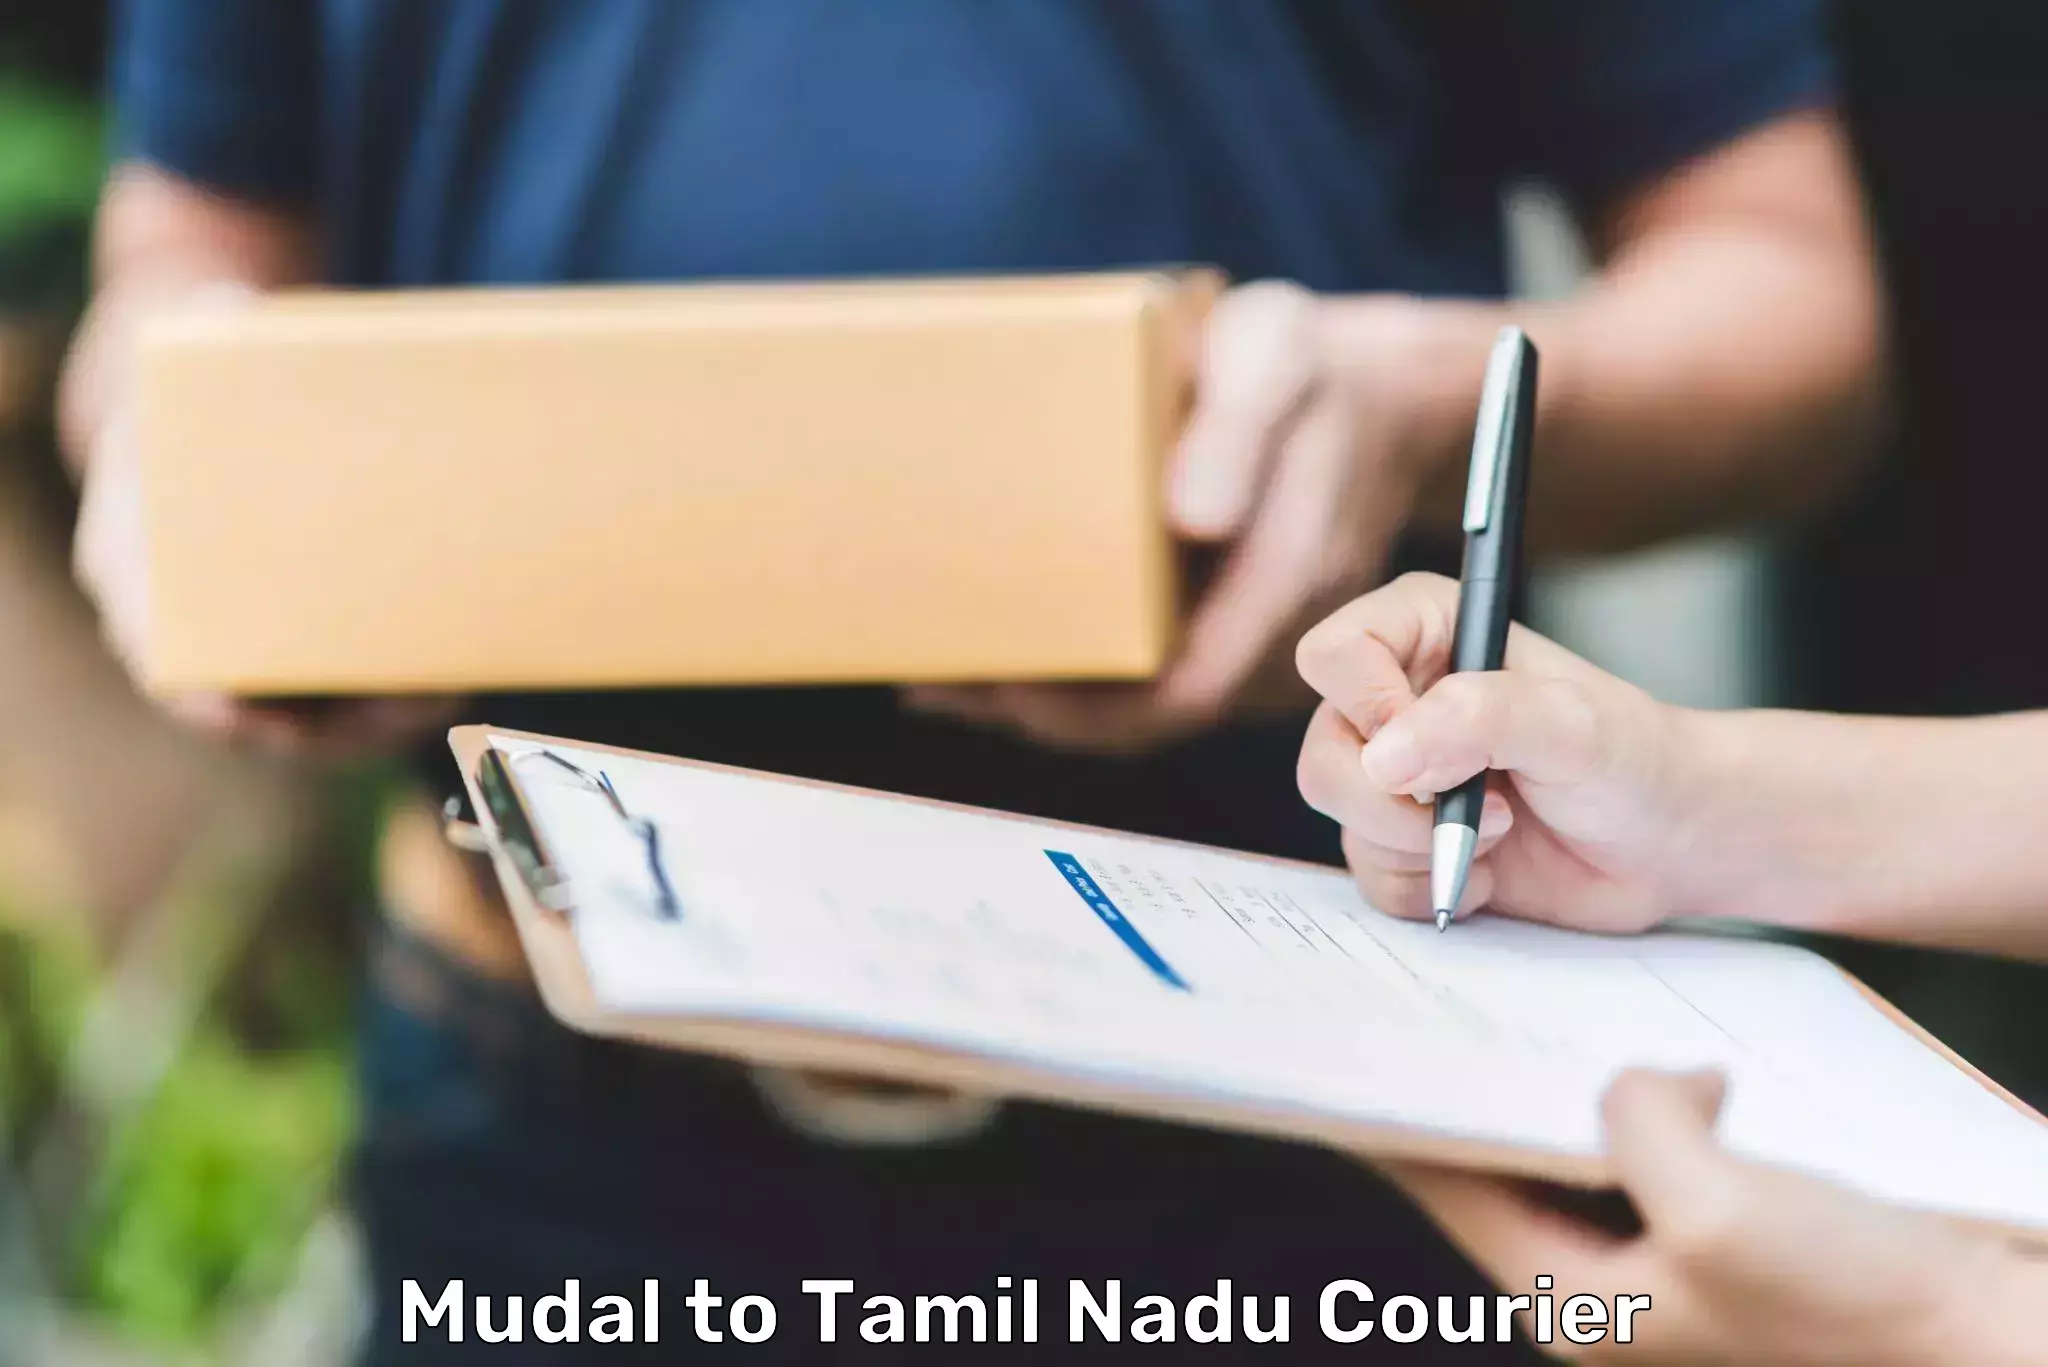 Expedited shipping methods Mudal to Tamil Nadu